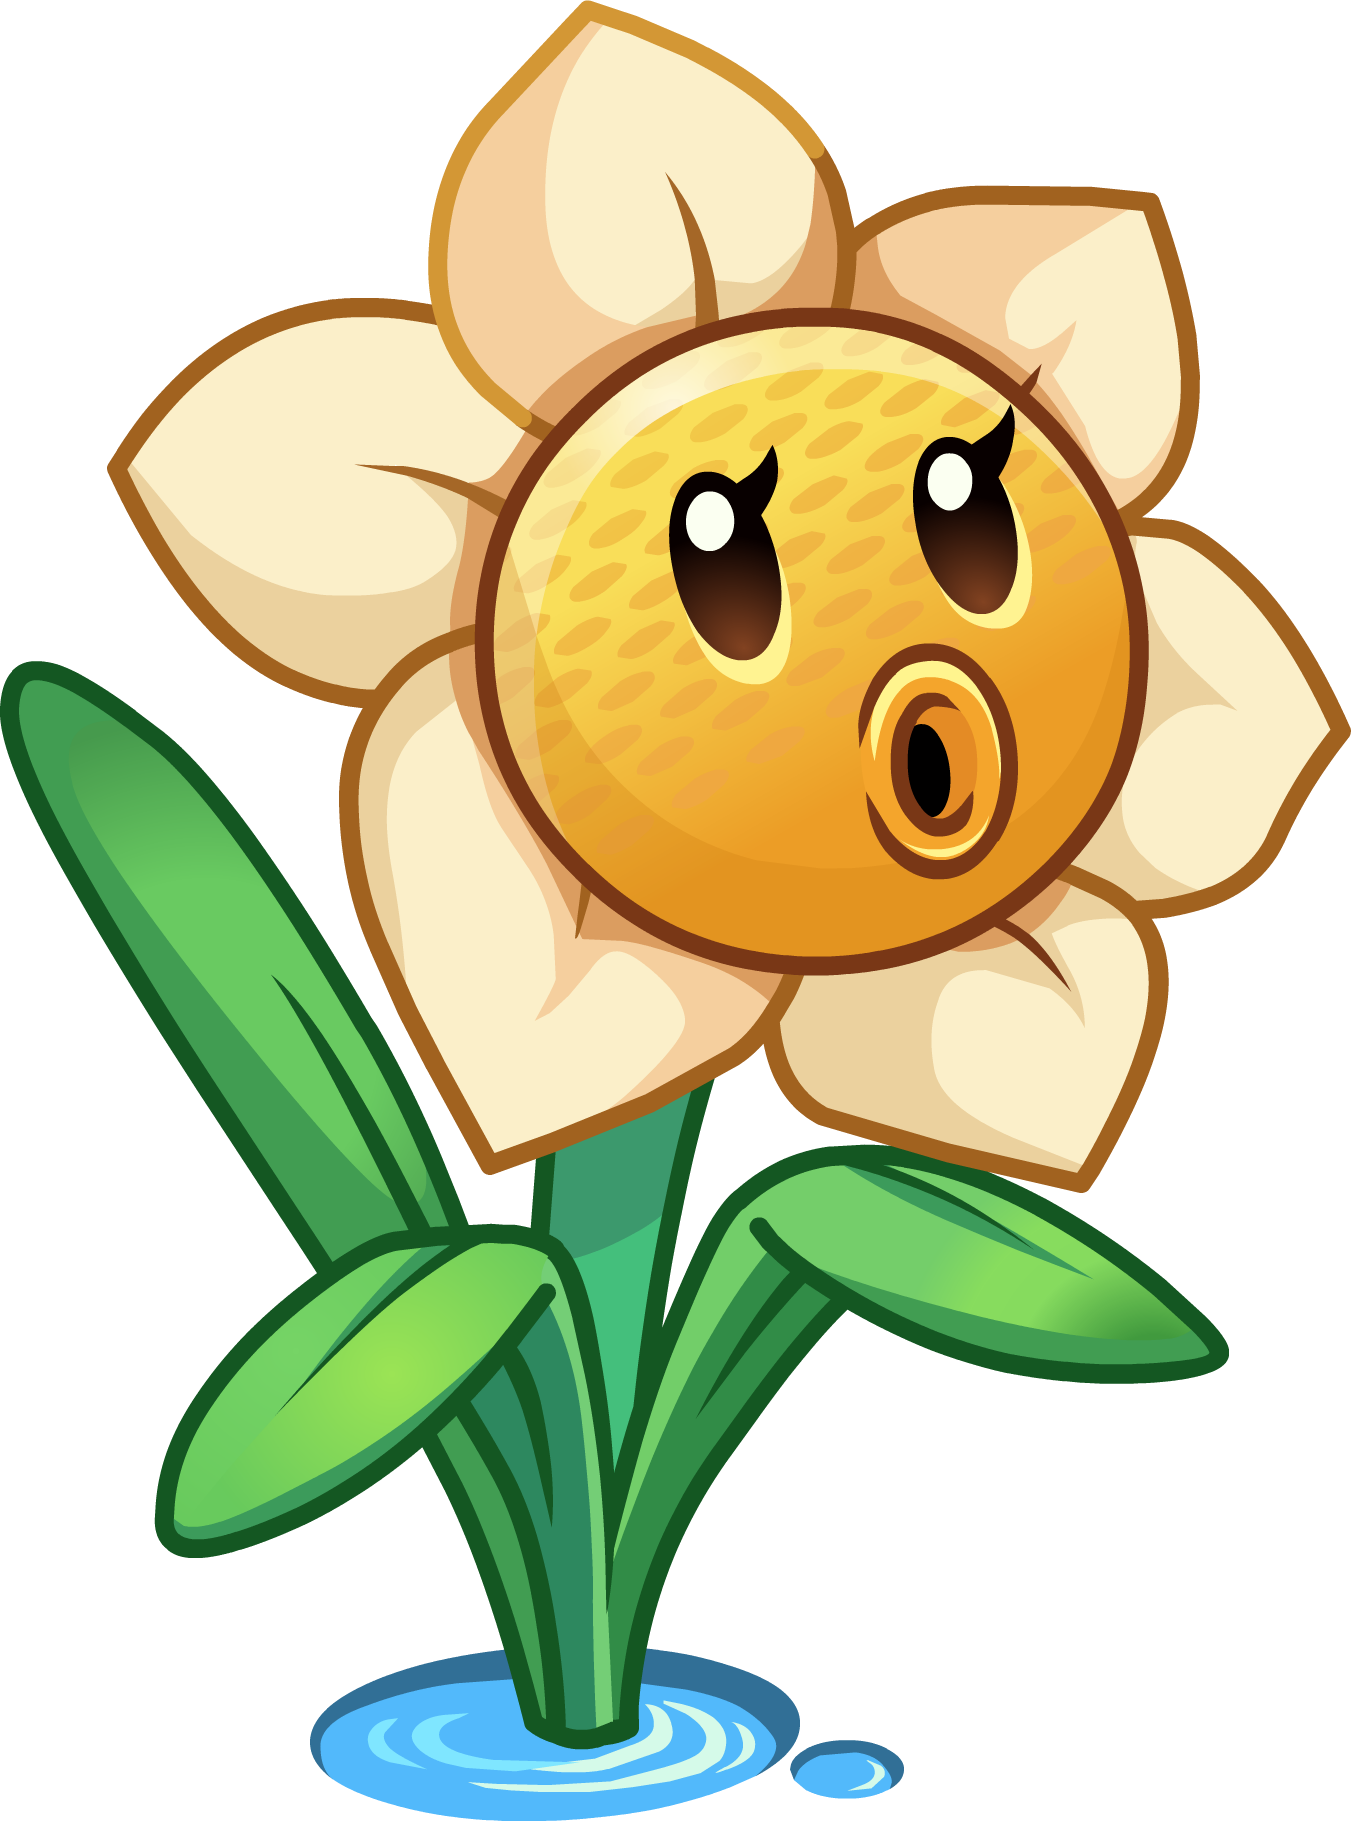 Narcissus plants vs zombies. Daffodil clipart trumpet flower